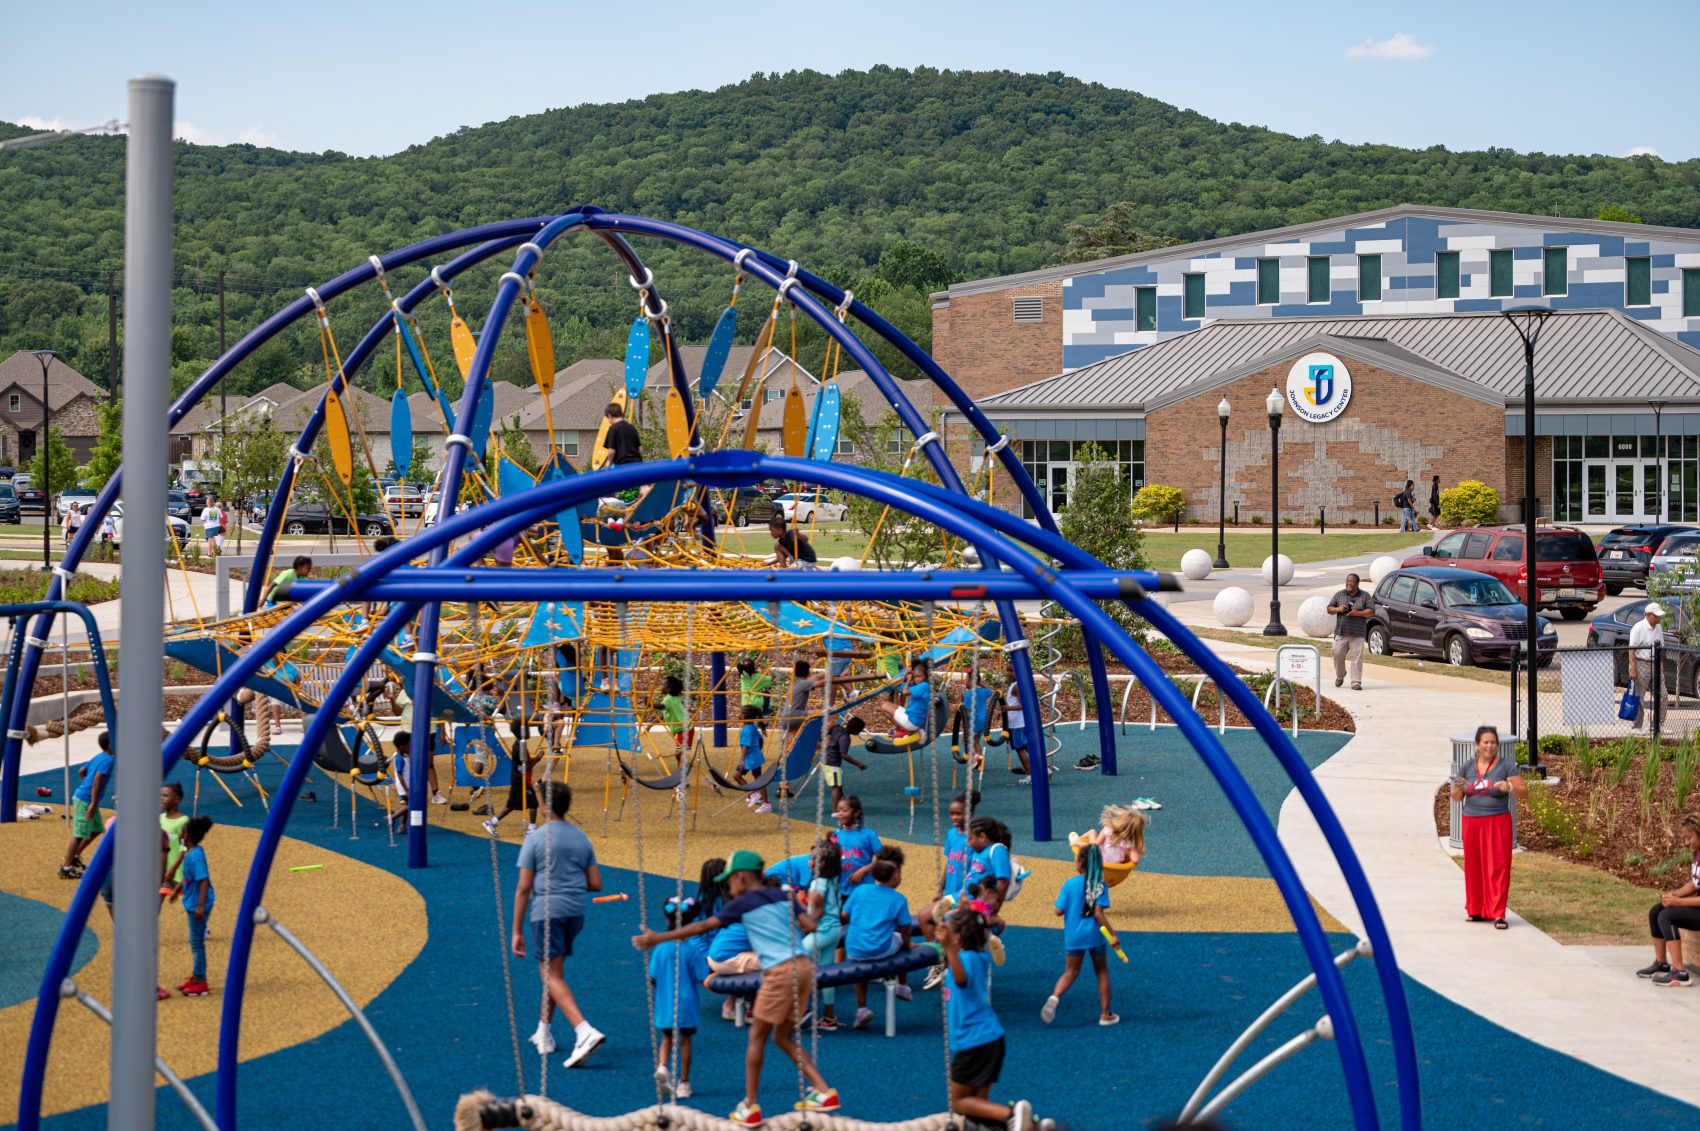 Children play on a playground during the grand opening of Legacy Park in Northwest Huntsville.